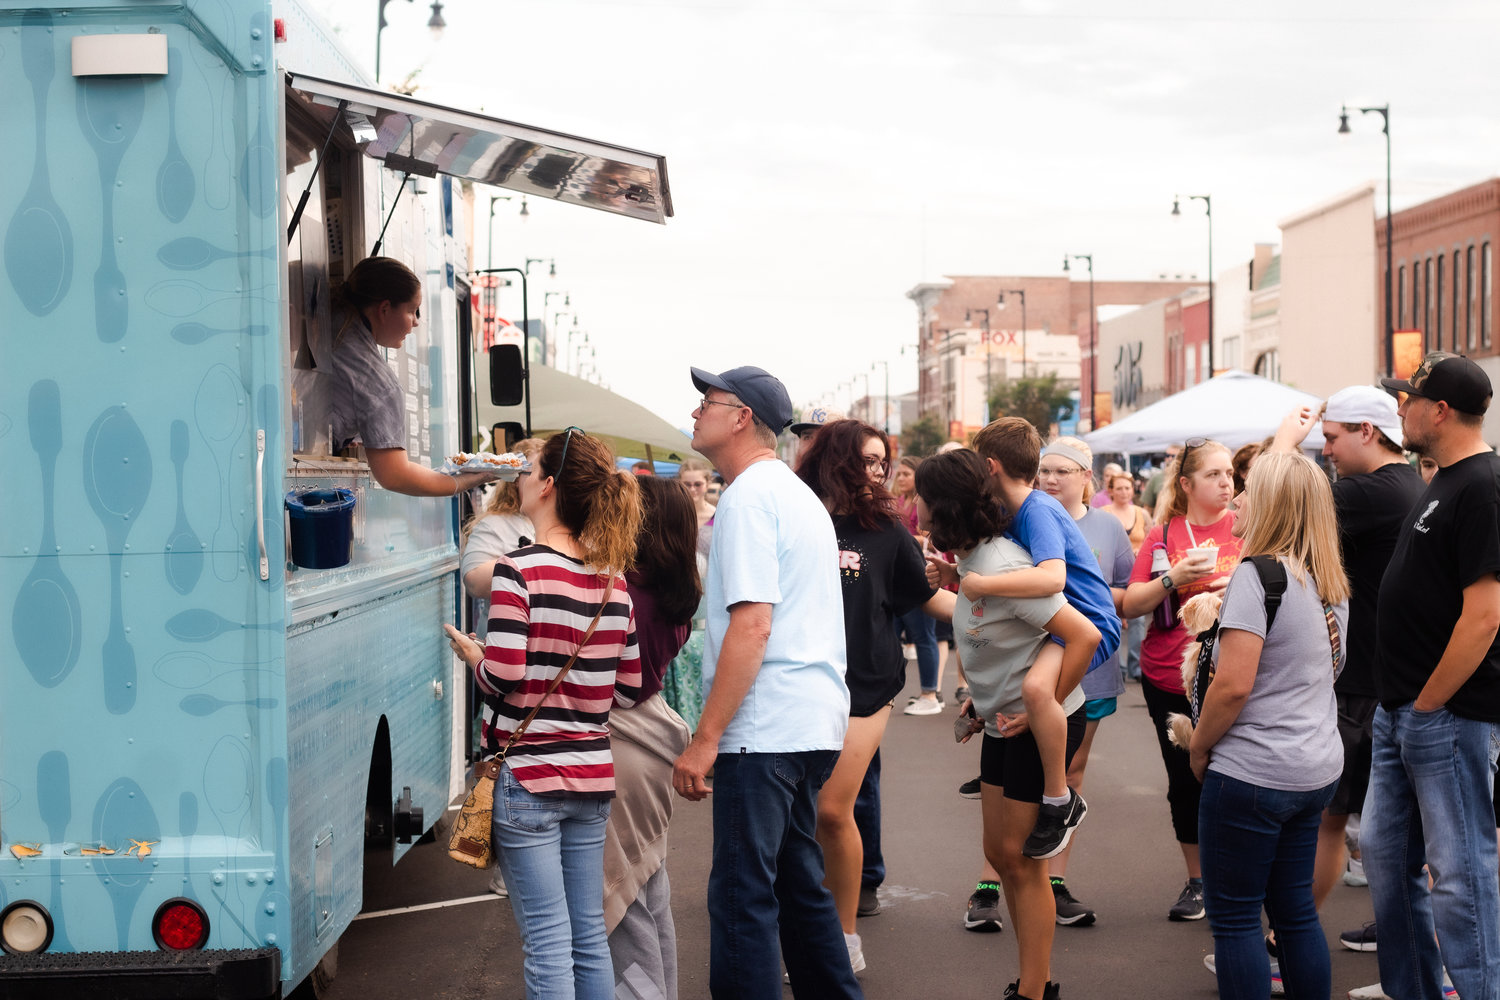 ArtWalk attendees wait in line at the Blue Spoon, one of the many food trucks at the Pittsburg ArtWalk on Friday. This season’s Artwalk featured over 20 vendors and organizations, and more than 50 artists.